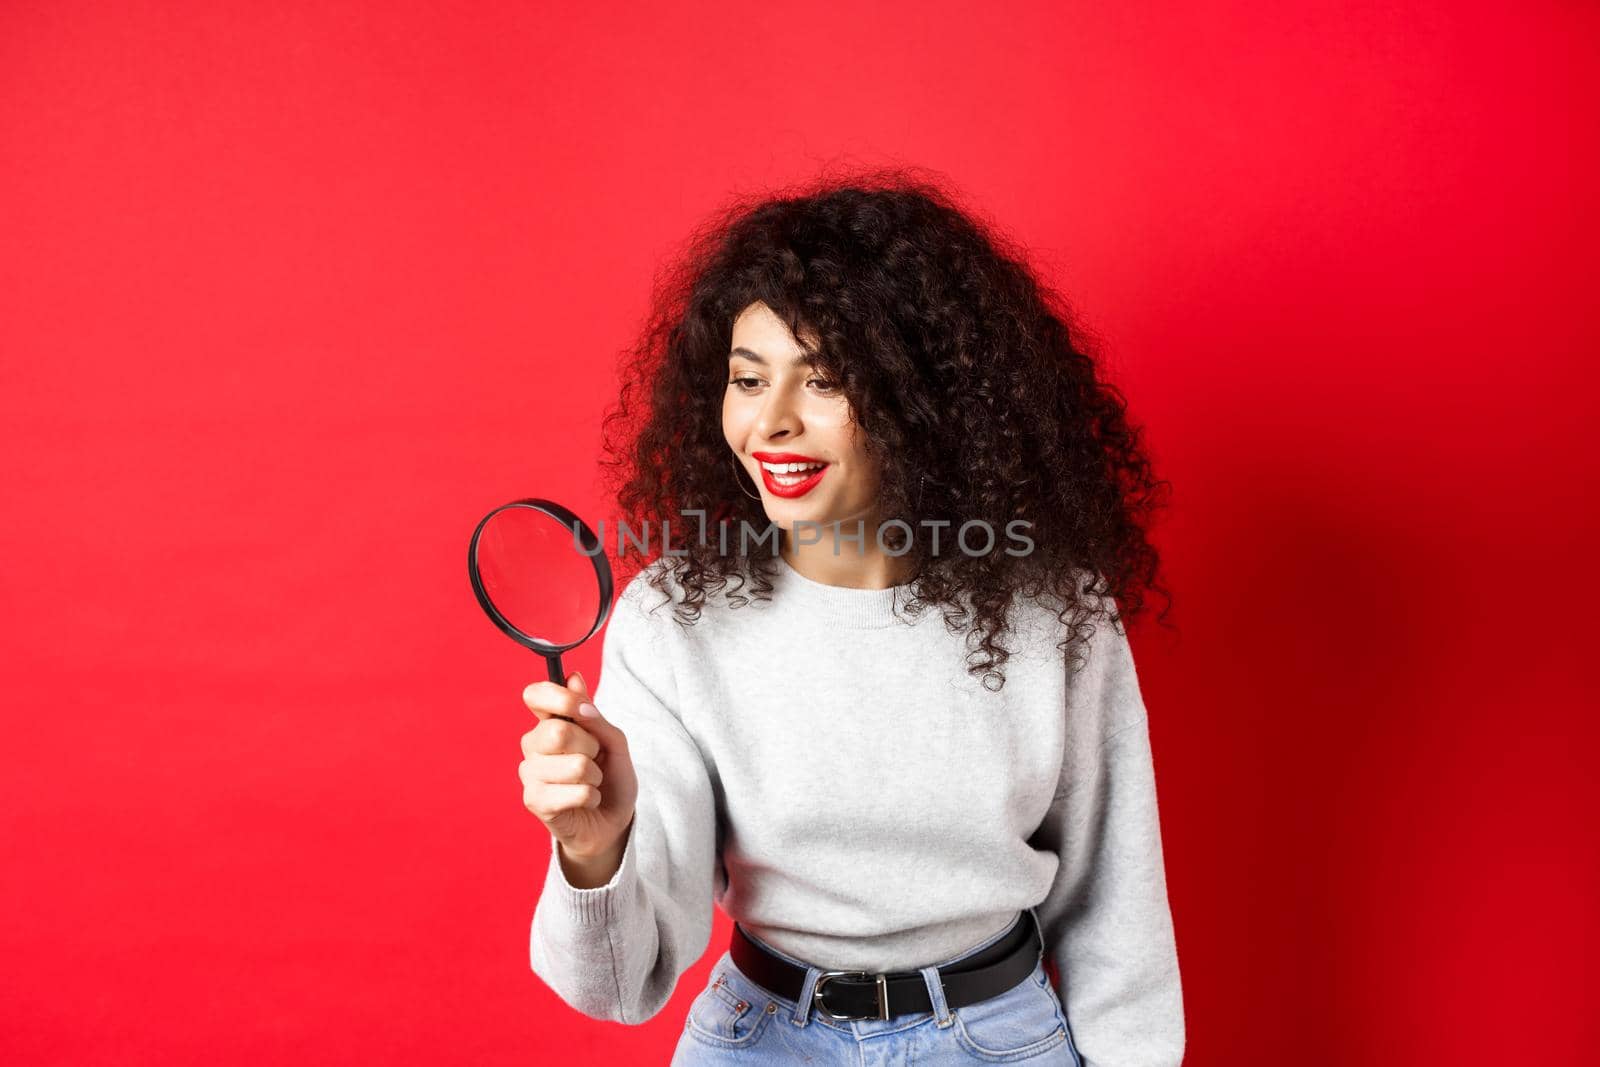 Young woman looking through magnifying glass, investigating or searching for something, stare curious aside, found interesting thing, standing on red background.